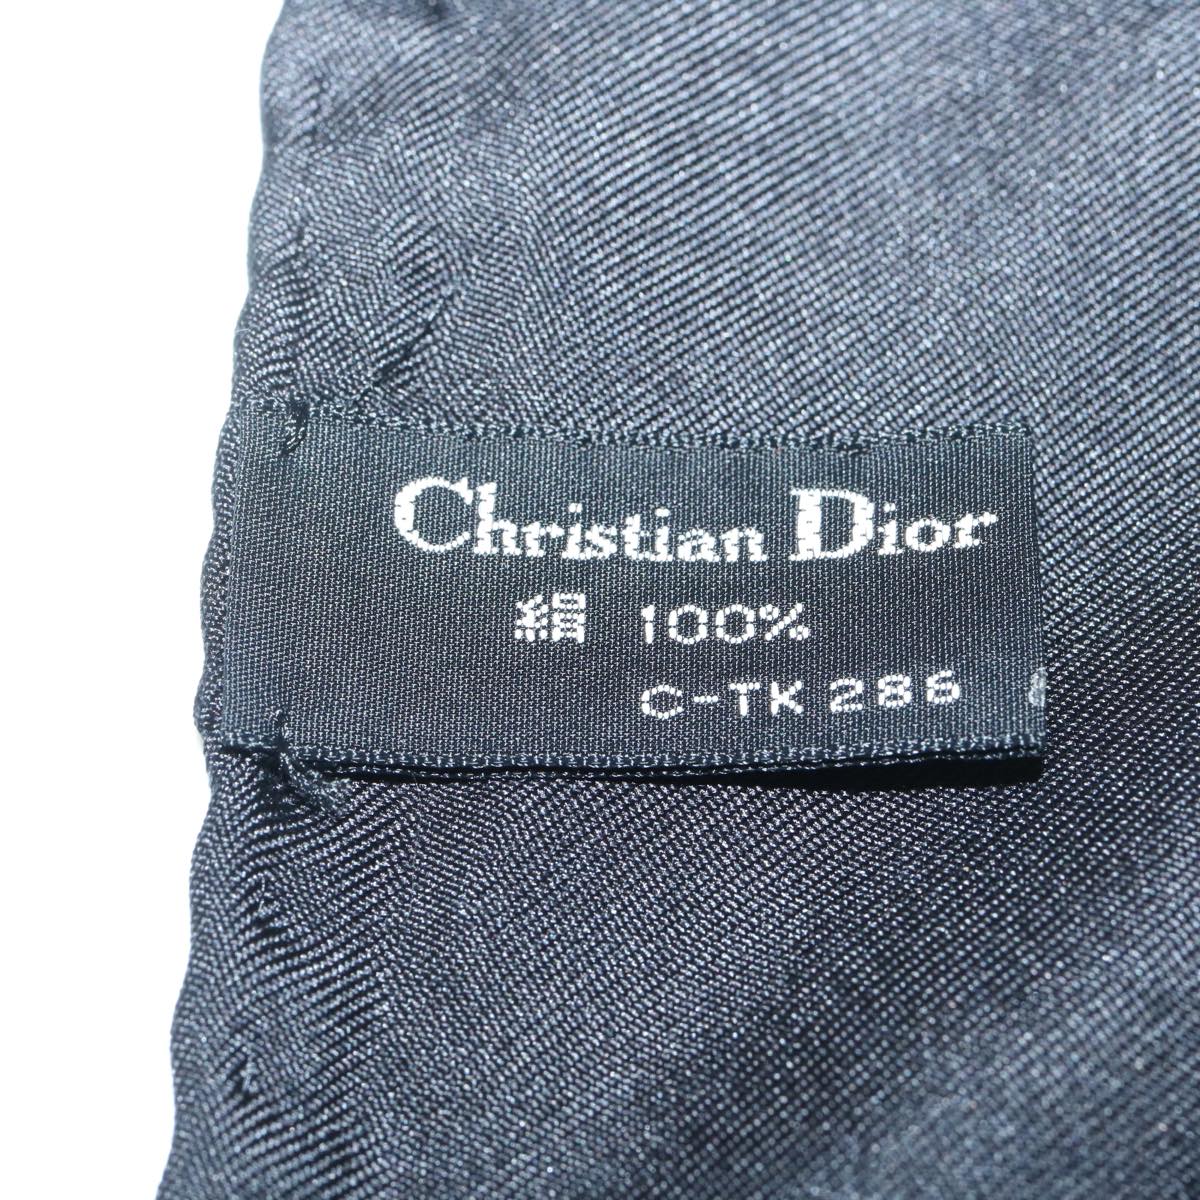 Christian Dior Trotter Scarf Silk 2 pieces Wine Red Black Auth am2432g